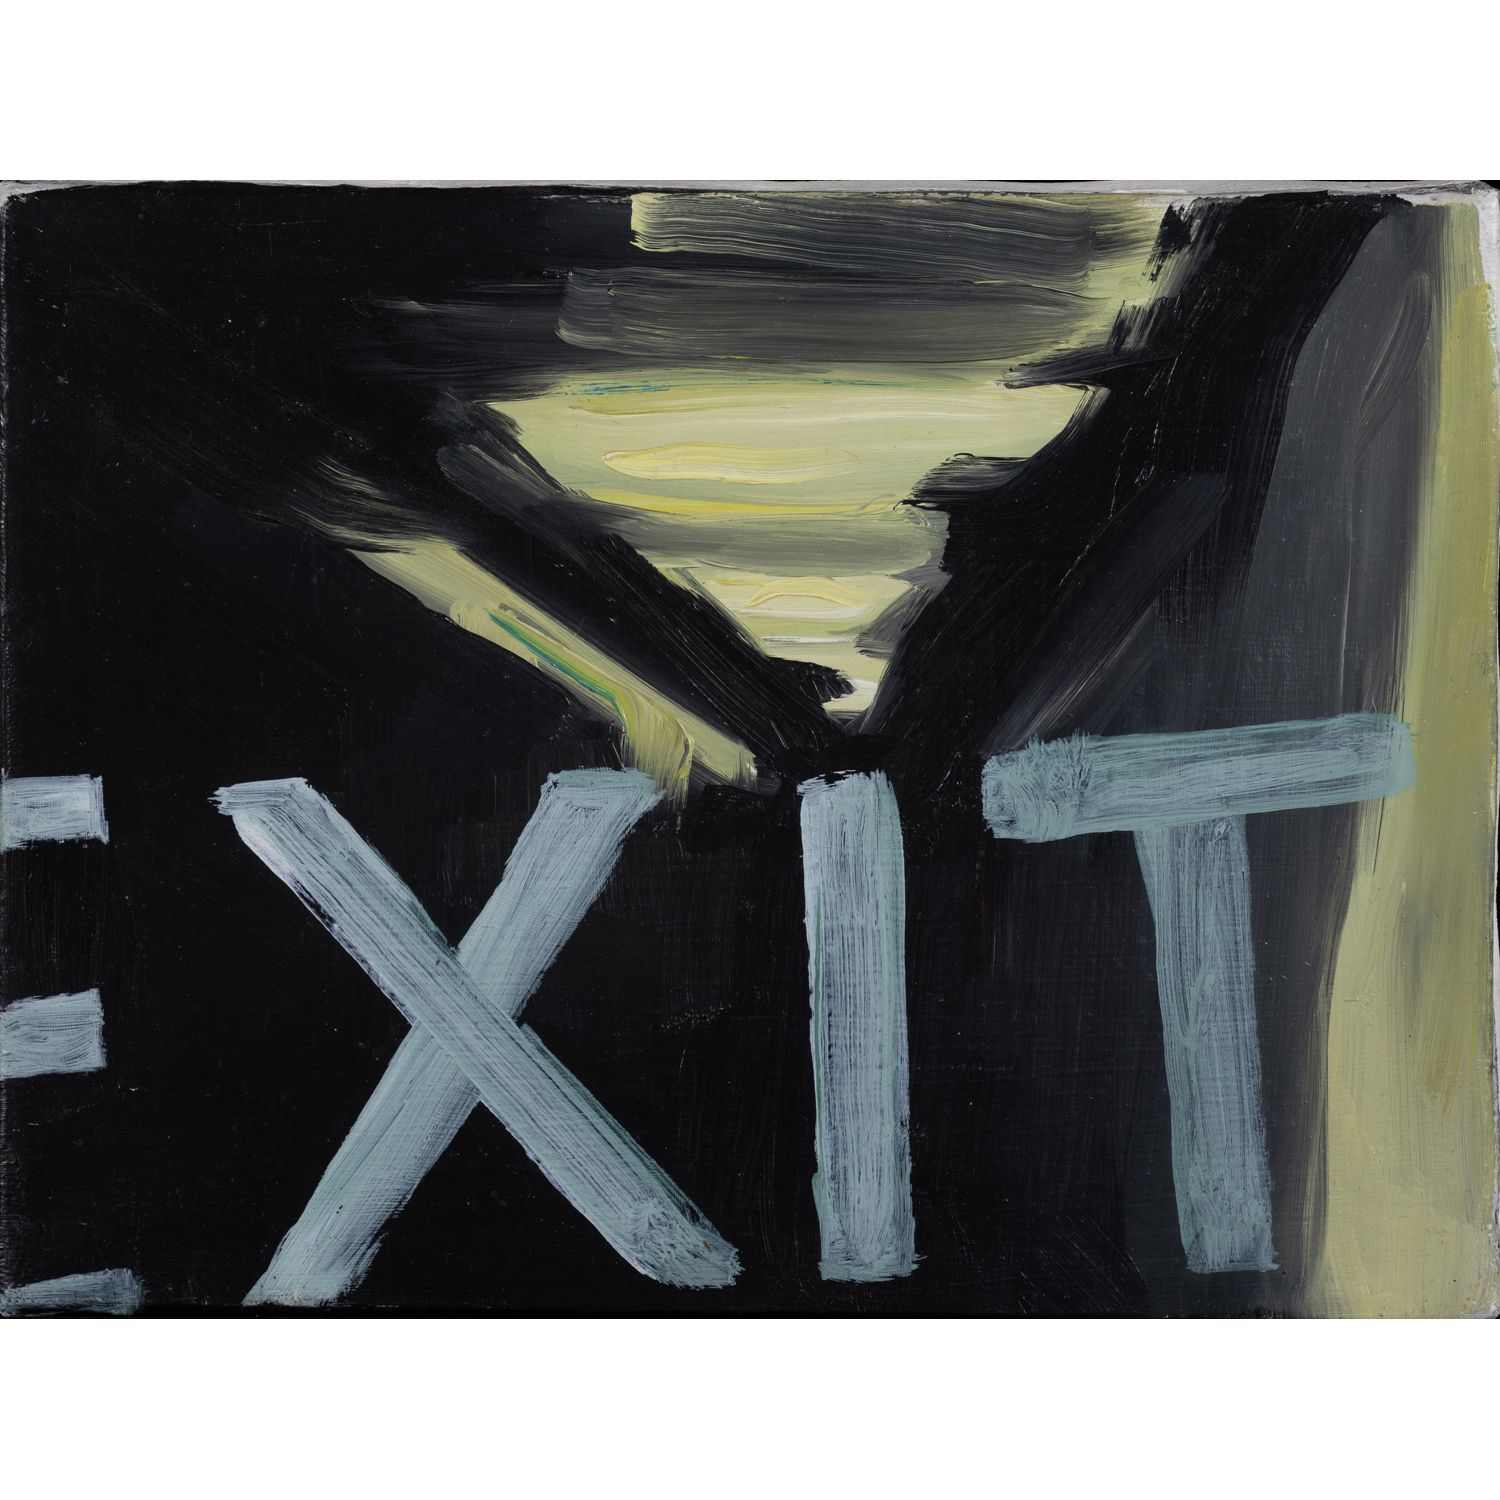 Null Charlotte Beaudry (born 1968)

Exit, 2006

Acrylic on canvas

Titled on the&hellip;